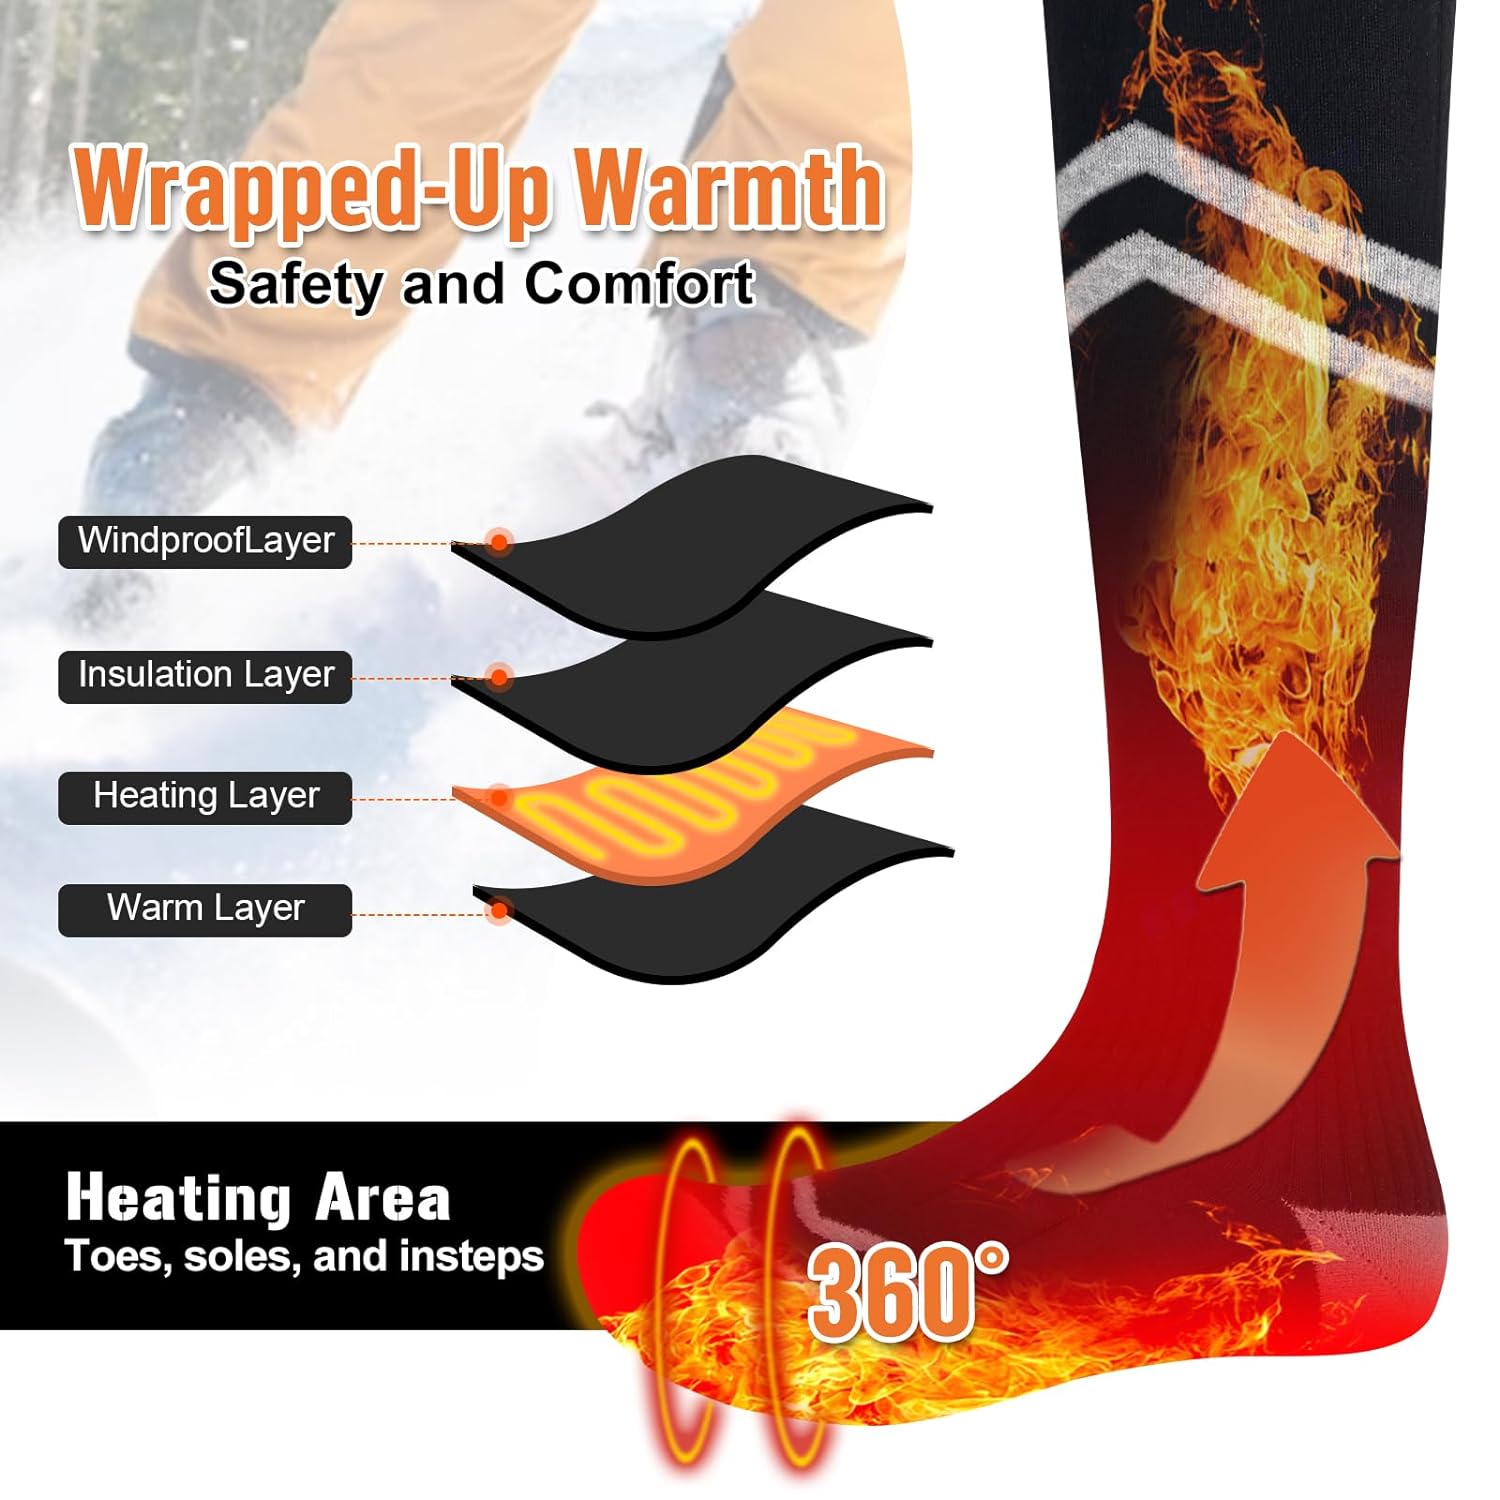 Heated Socks,5000mAh Rechargeable Heated Socks with APP Control, Foot Warmer for Men & Women, Ideal for Hunting, Skiing,3 Heat Settings & Timer,Battery Electric Socks